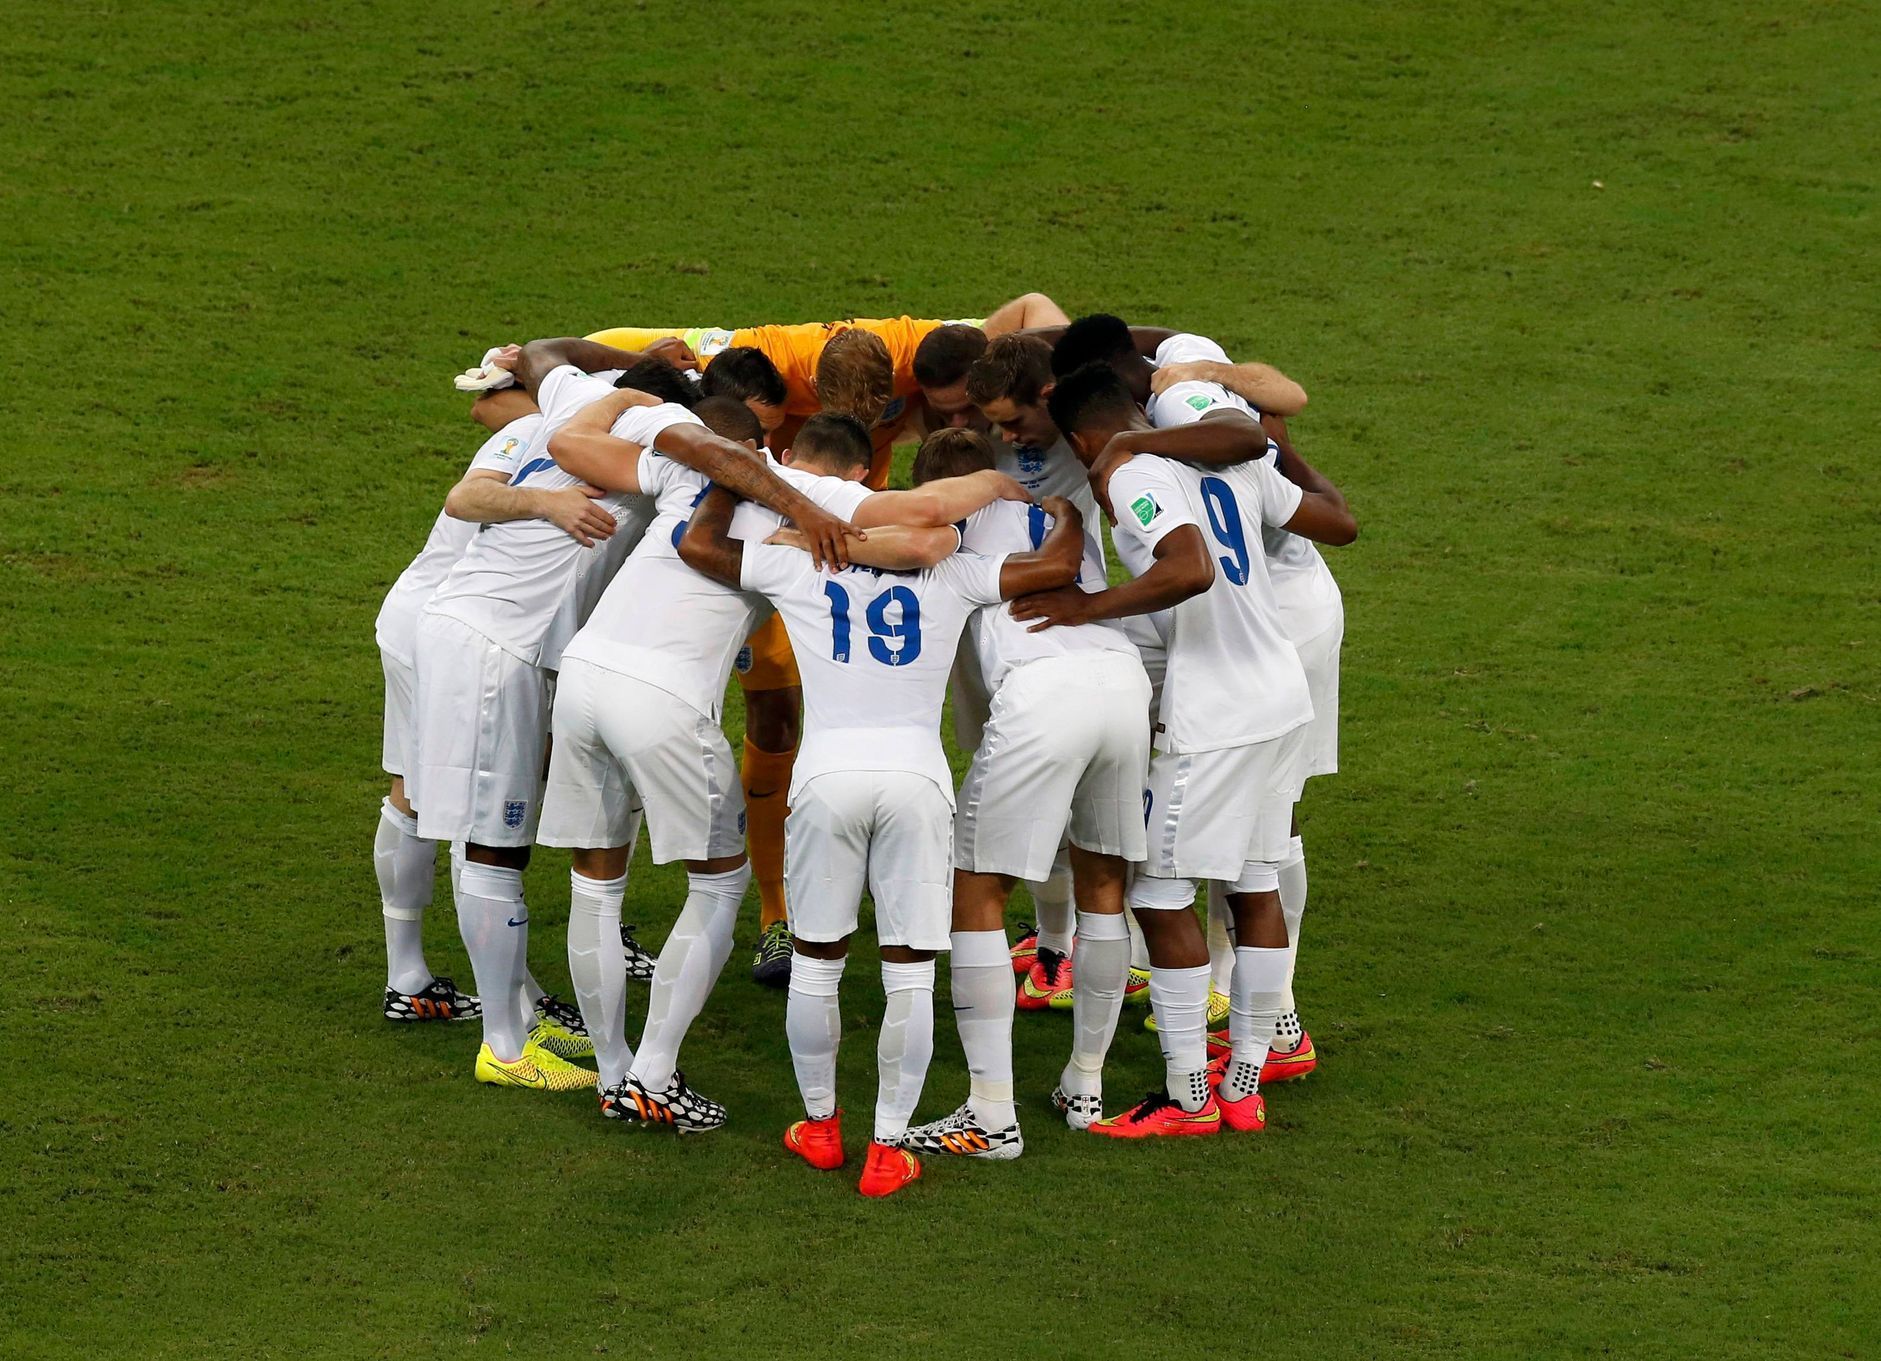 England players huddle before their 2014 World Cup Group D soccer match against Italy at the Amazonia arena in Manaus